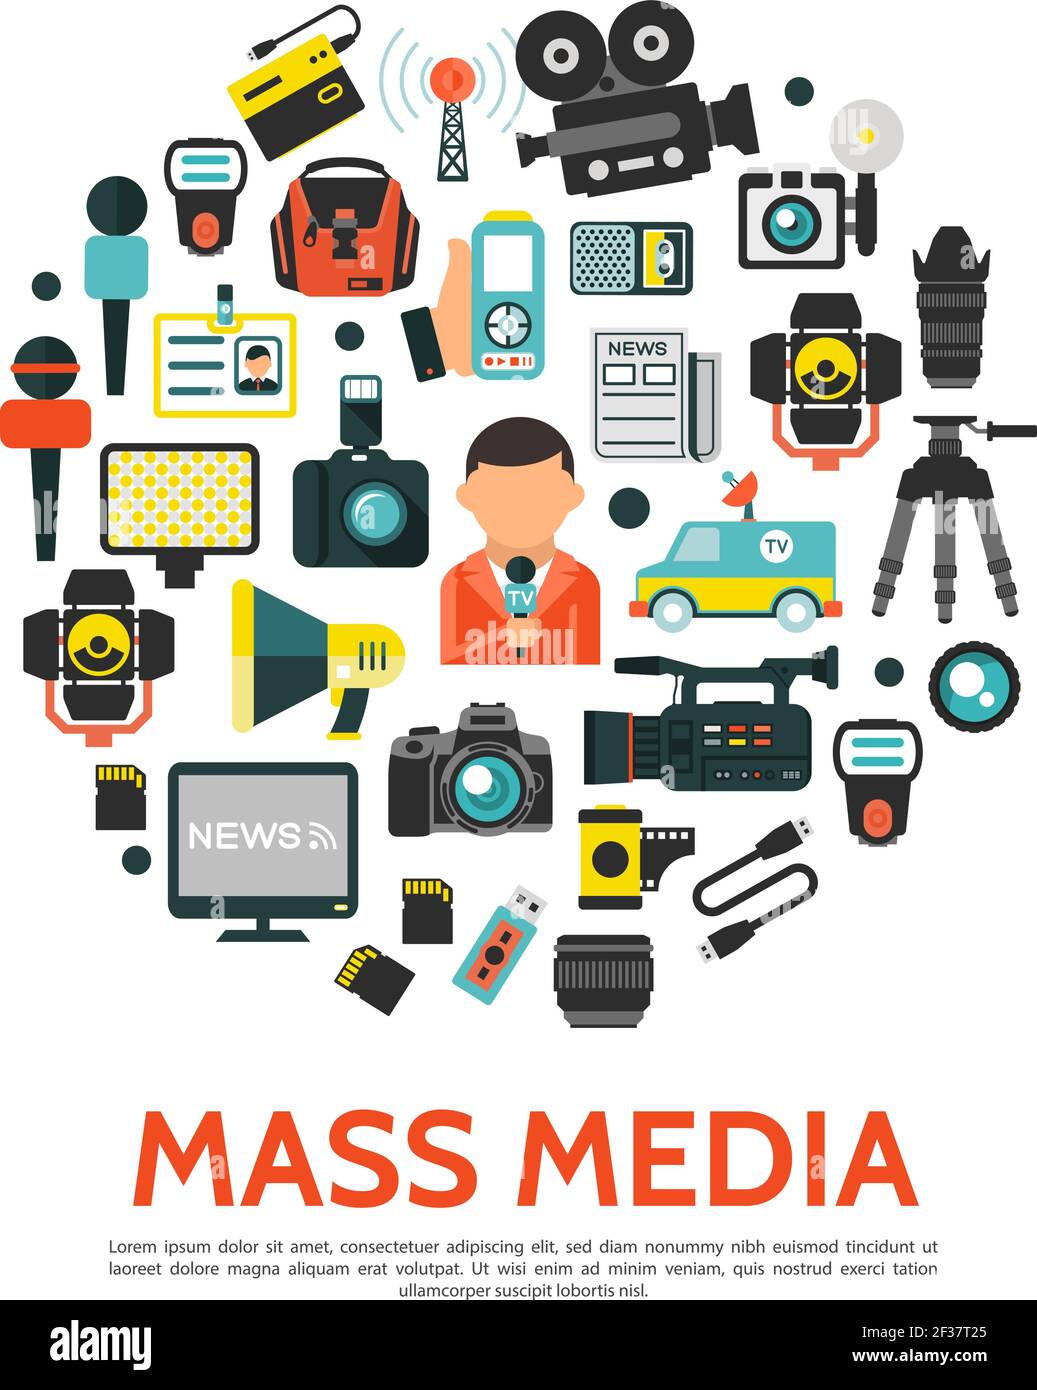 Flat mass media round concept with reporter radio tower news car photo video cameras microphones tripod megaphone id card newspaper dictaphone uniform Stock Vector